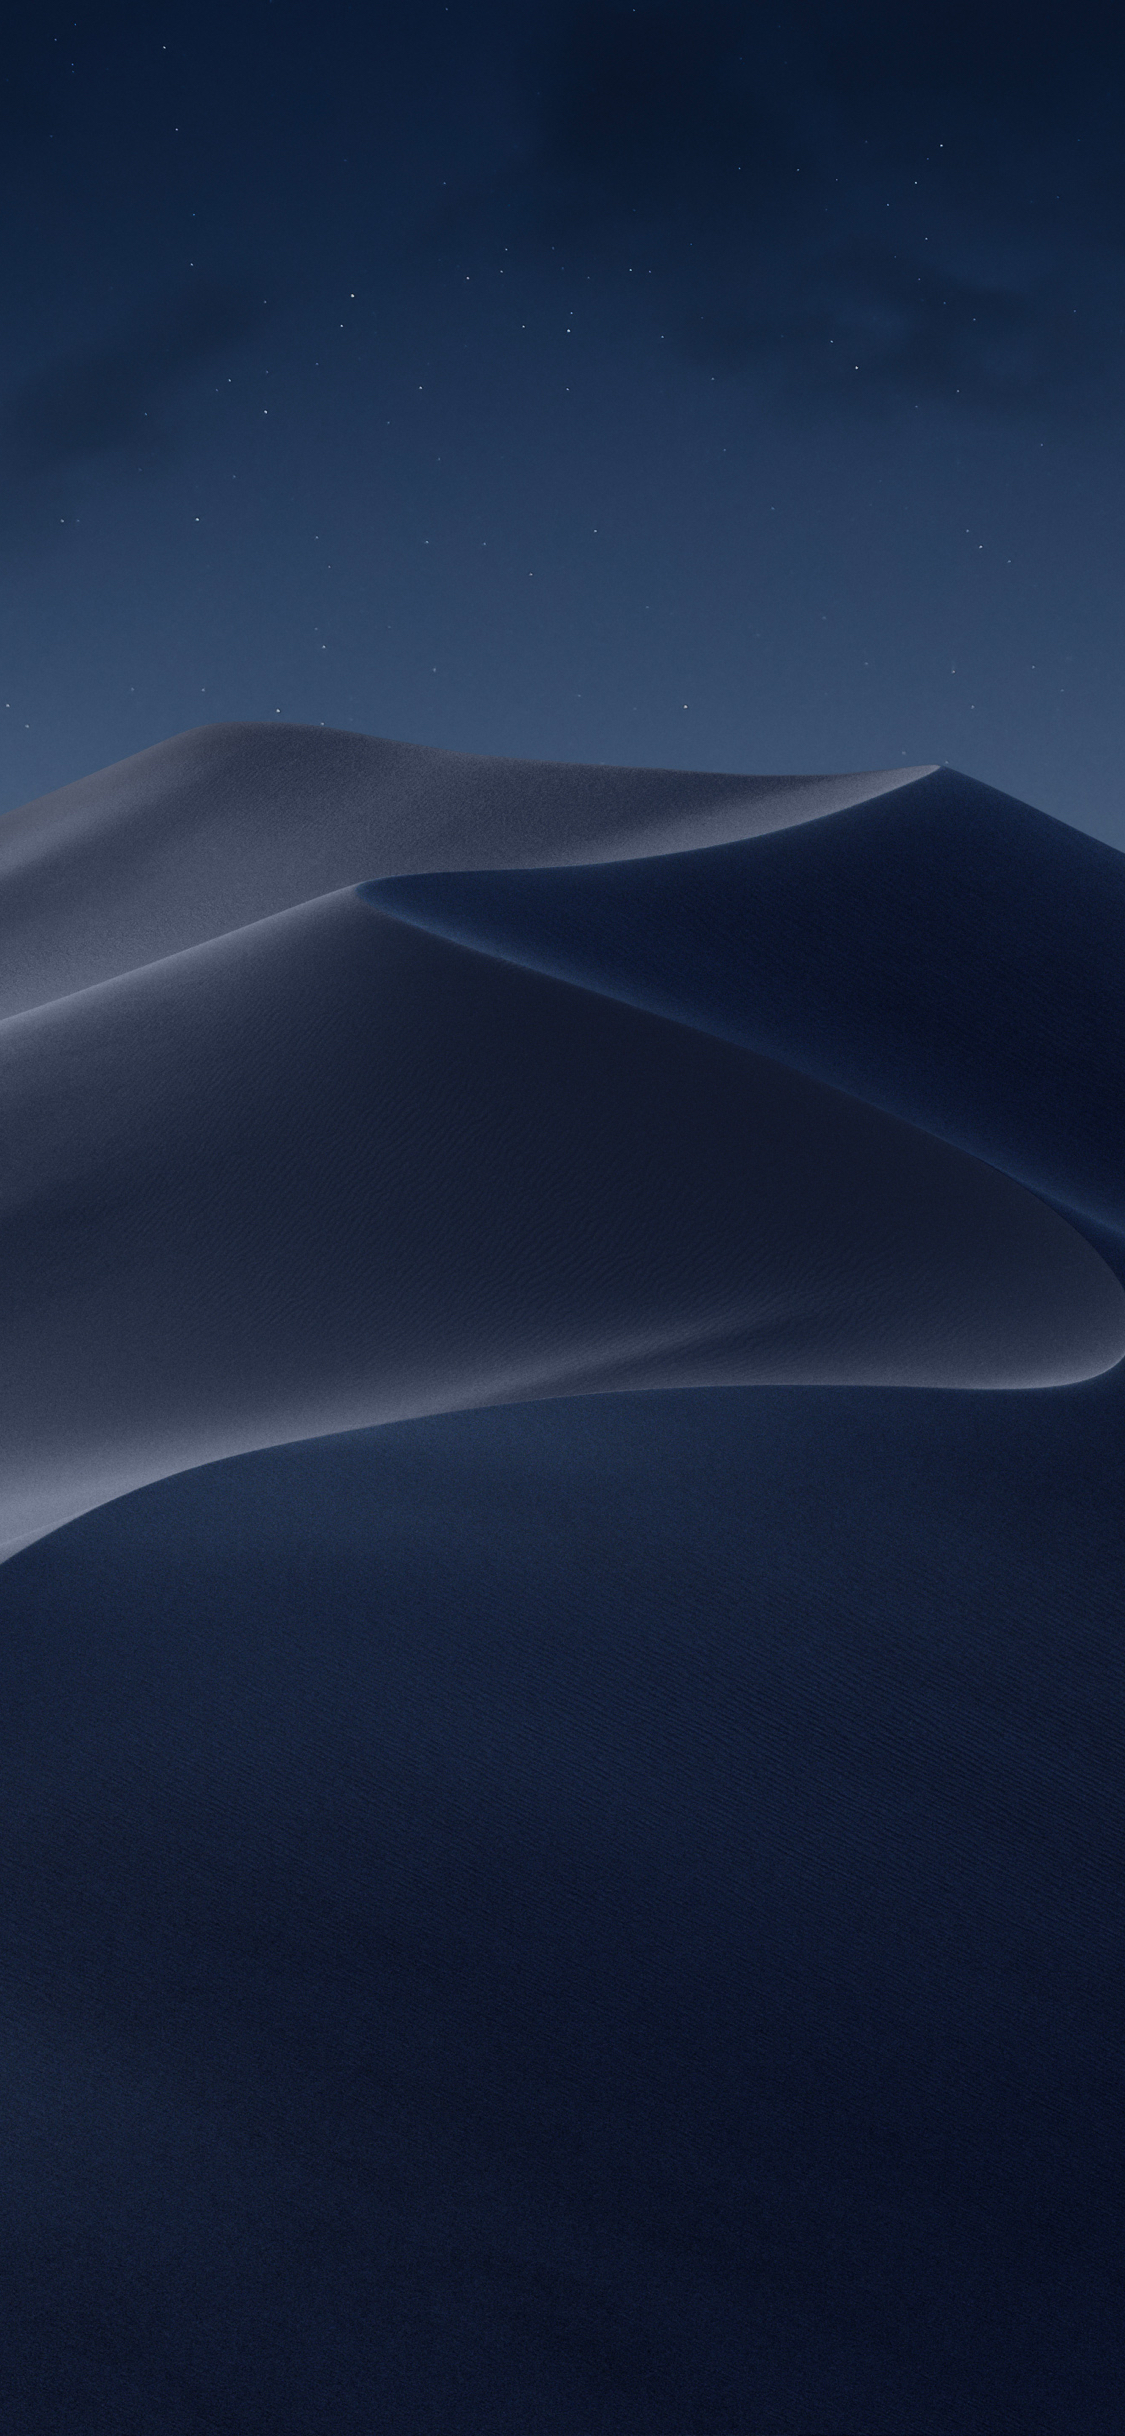 Mac os mojave dynamic wallpaper download for windows 10